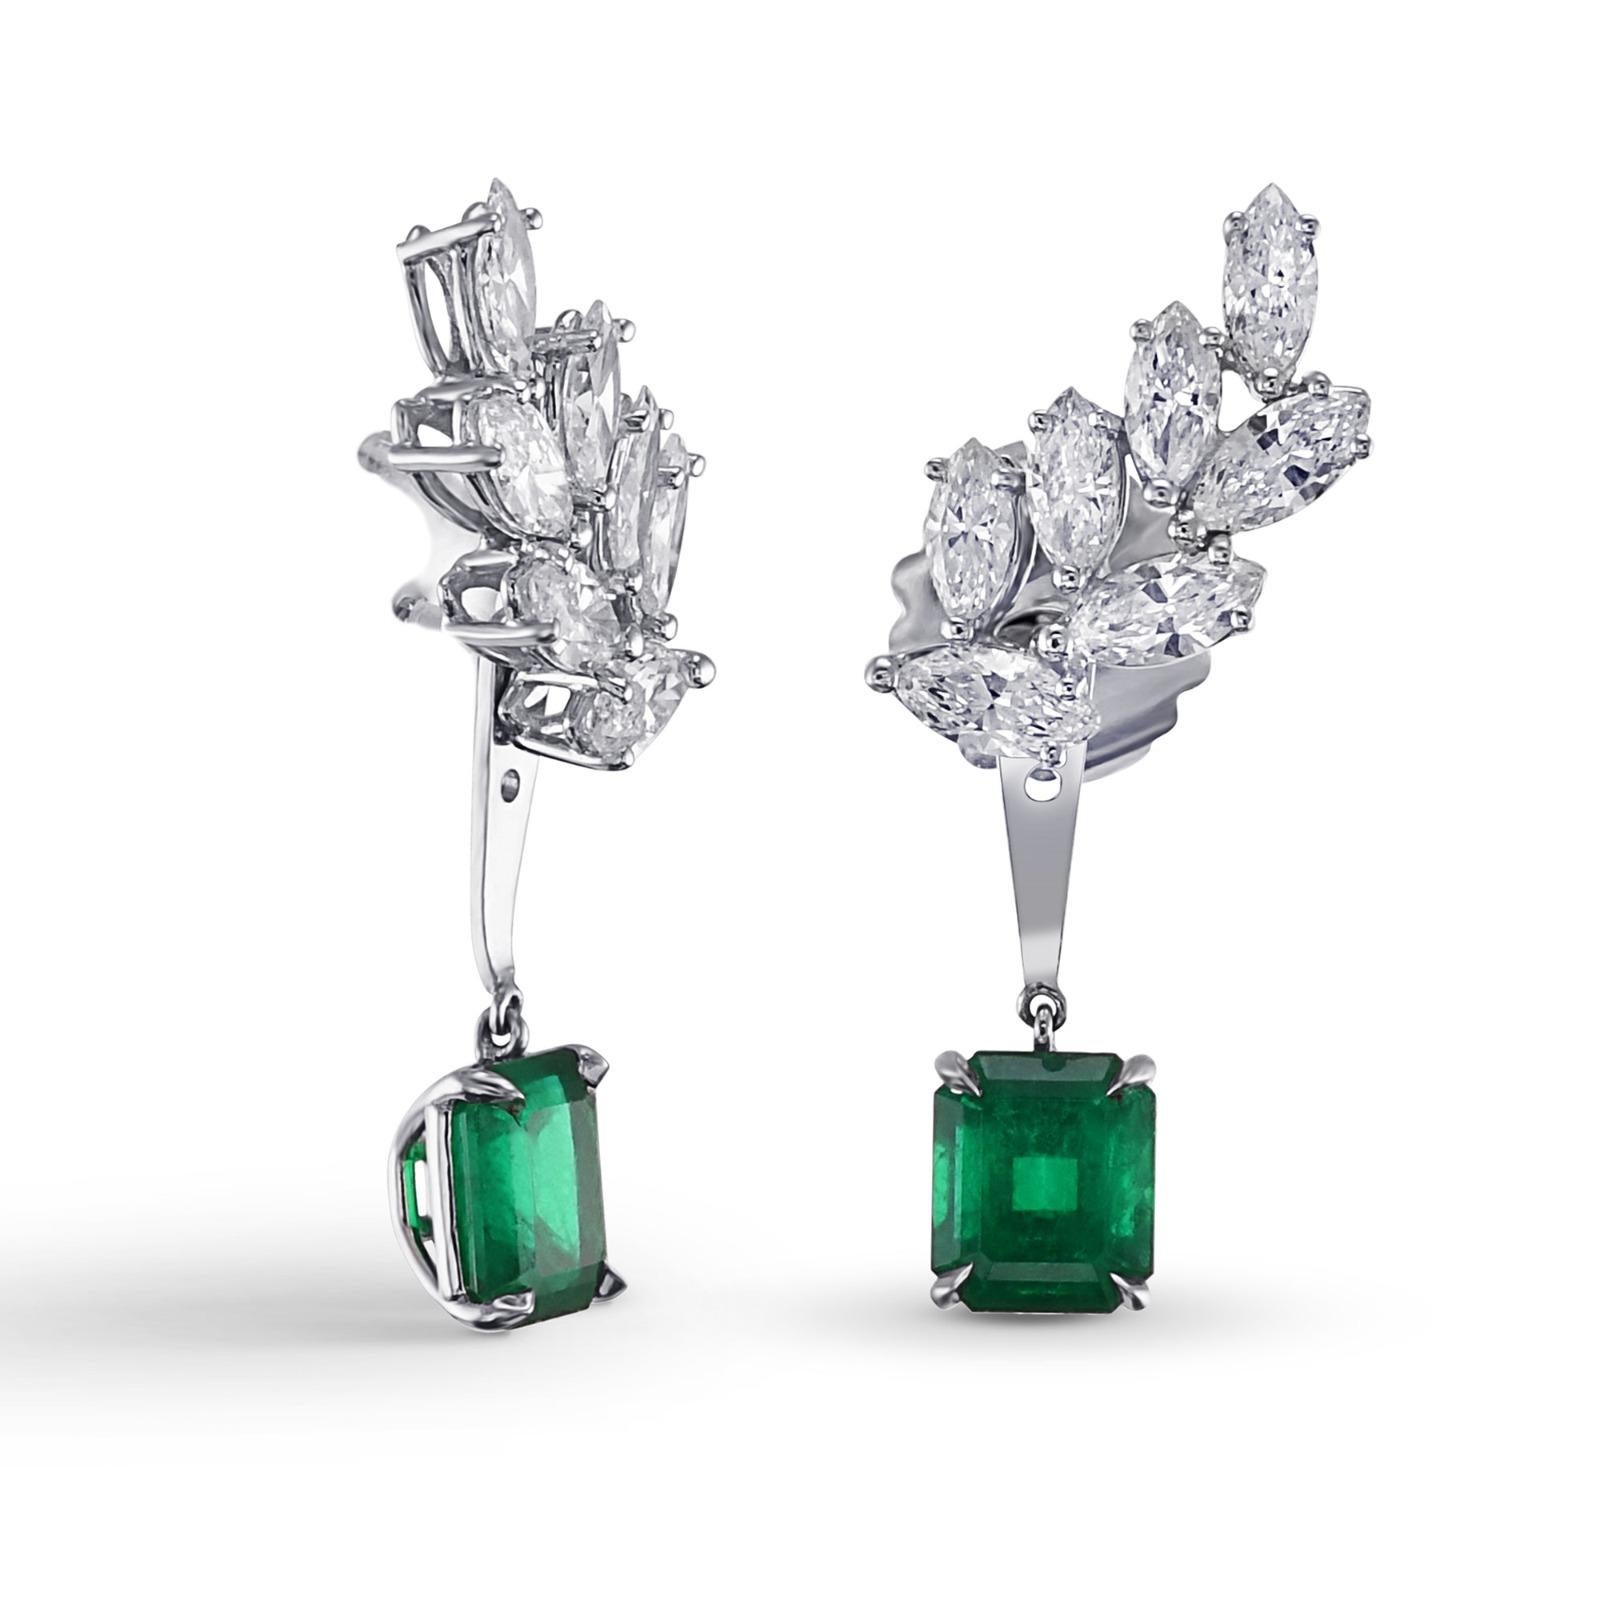 Stone on stone marquise diamonds climb the ear for a chic, and cutting edge, look.  The elegant diamond tops allow for the detachable Colombian emerald drops to be suspended from behind the ear.

14 diamonds weigh a total of 2.36 carats (app. F